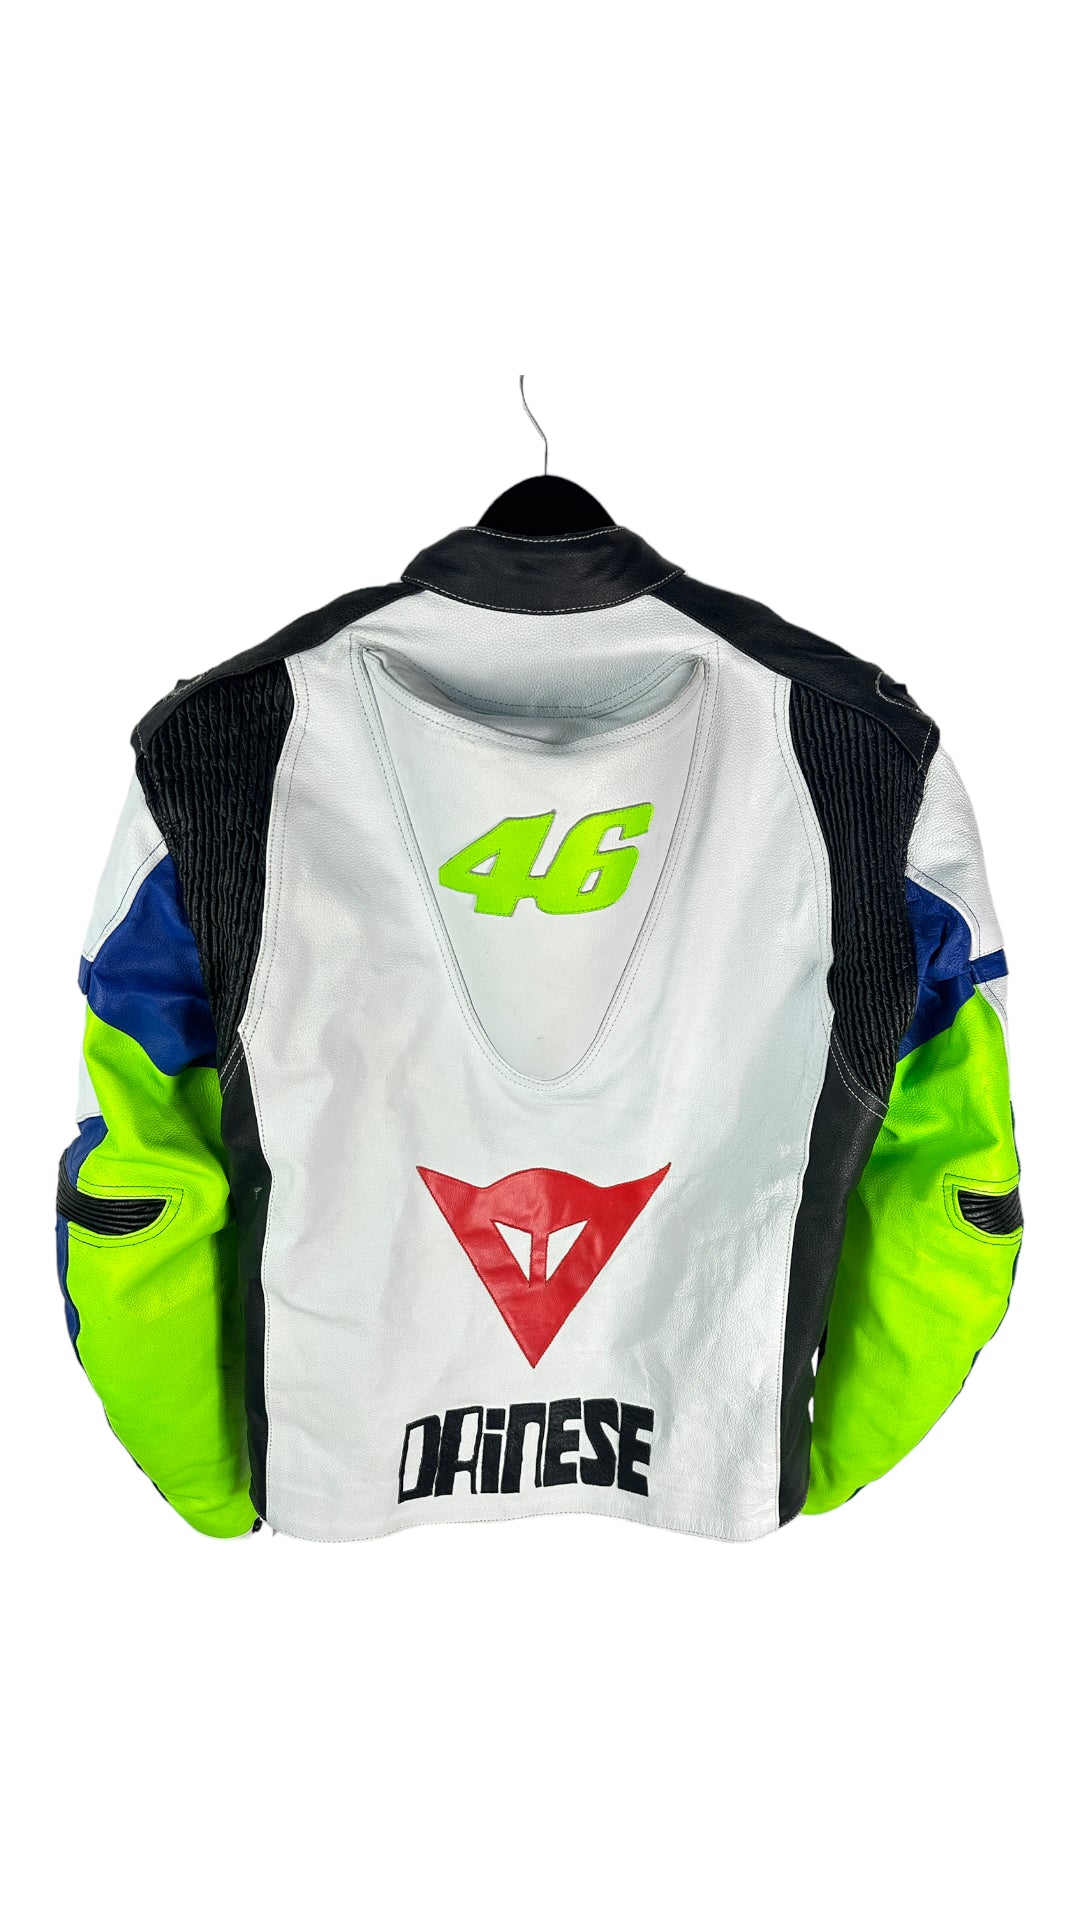 Dainese Avro 4 VR46 Leather Armored Motorcycle Racing Jacket Sz Med